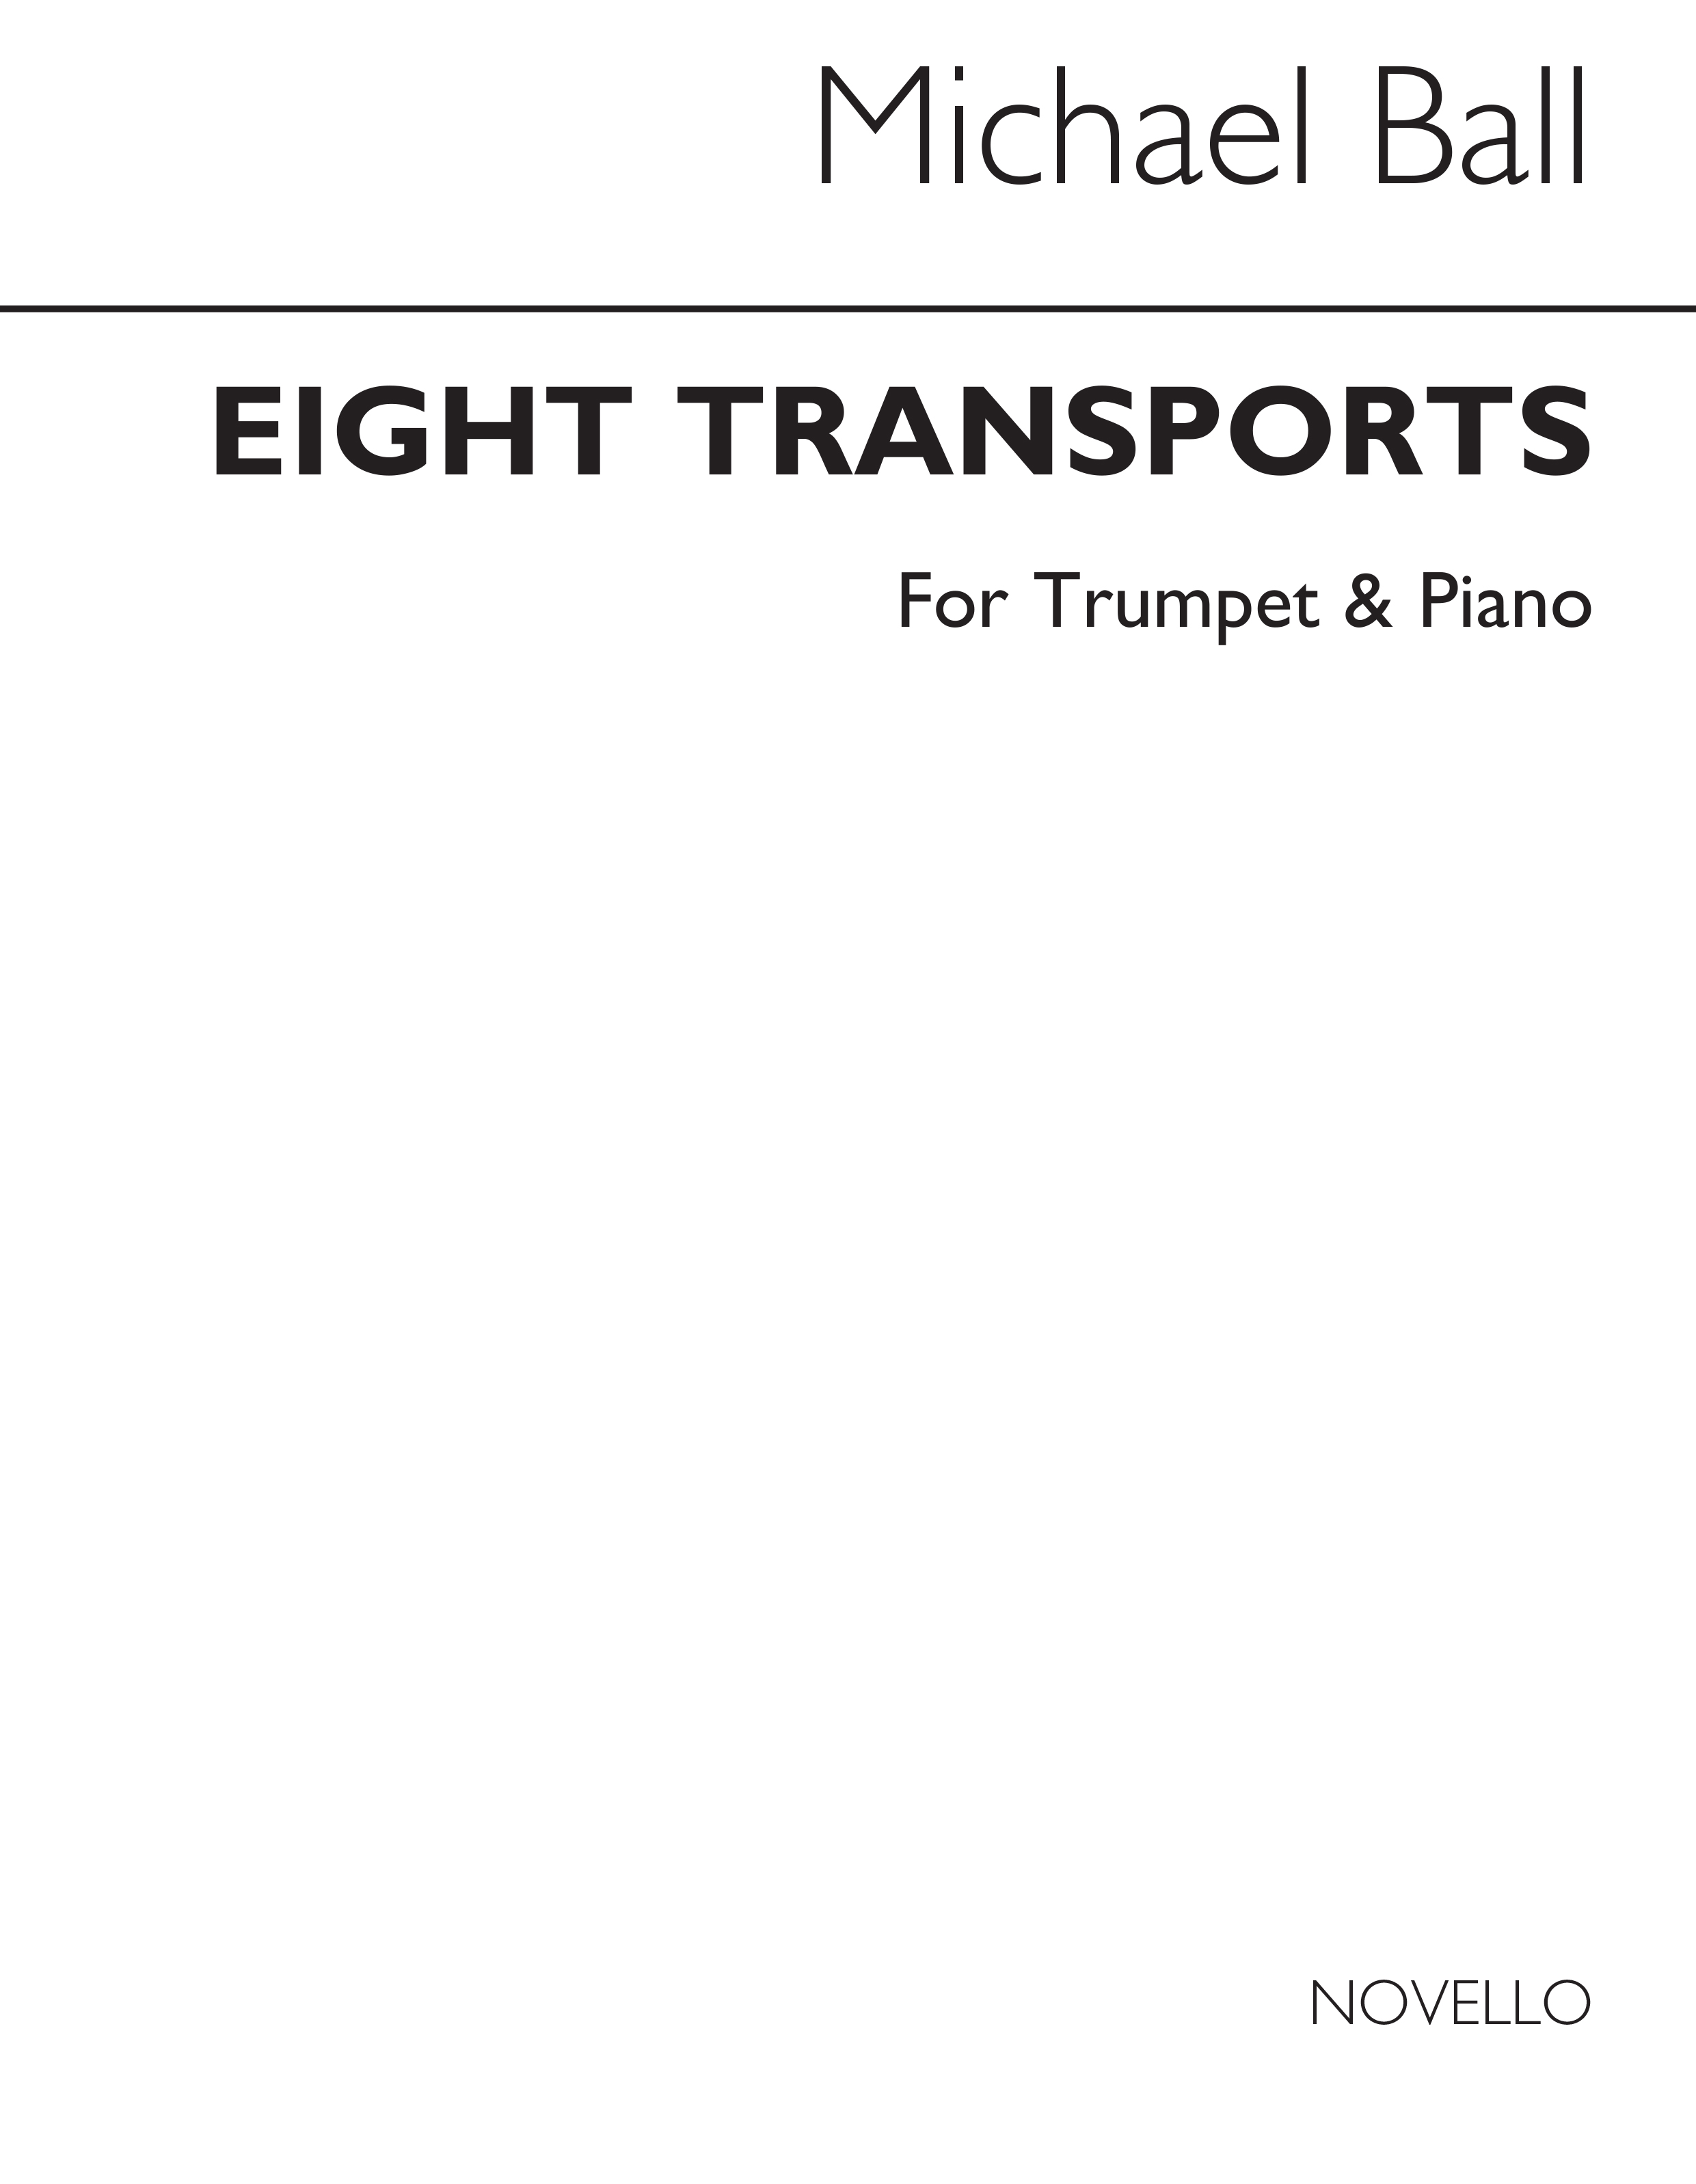 Ball: Eight Transports for Trumpet and Piano